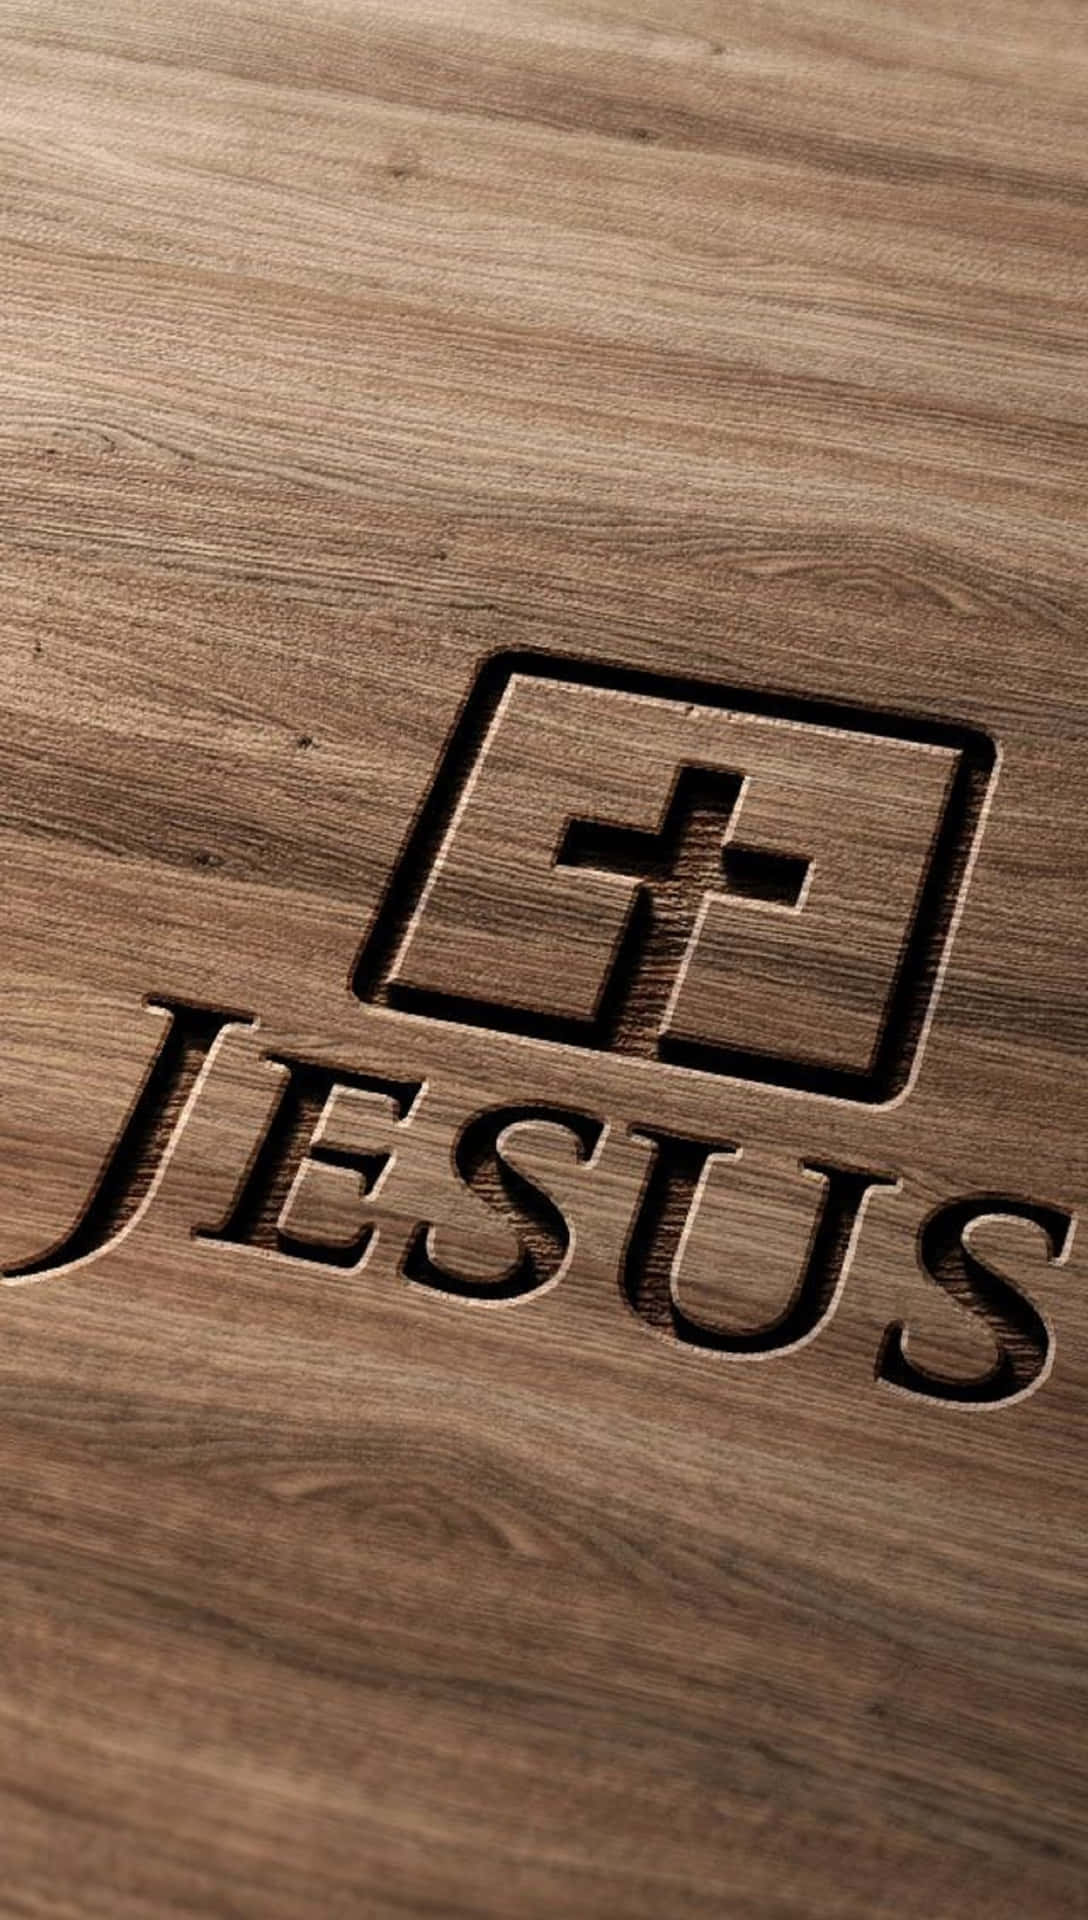 Jesus Logo On A Wooden Table